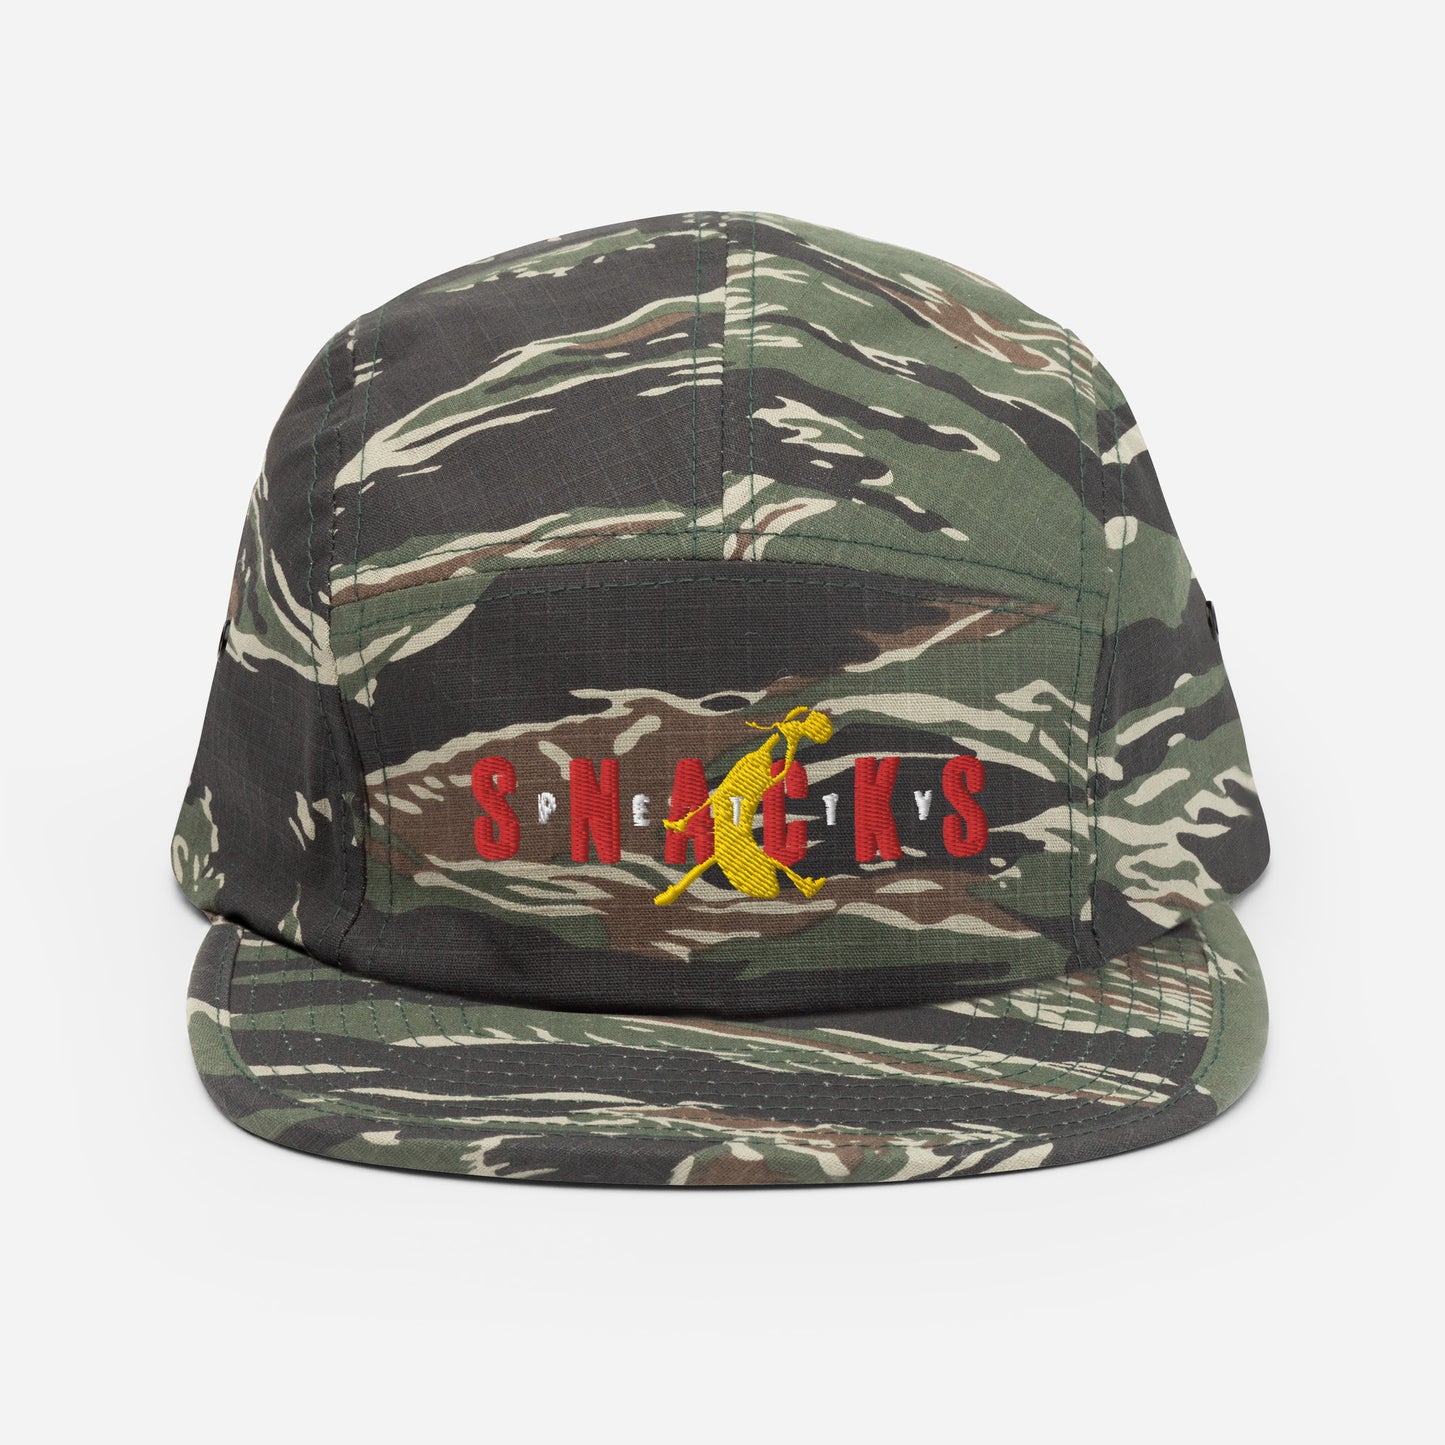 Green tiger camo five panel hat, front panel has embroidered graphic. "Petty Snacks" with a jumpan inspired logo that is a yellow banana duking a bong. The word "Snacks" is big and spread across front in red. The word "PETTY" is small lettering, with each letter in between the letter of "Snacks" and over the banana. Logo is inspired by jumpman graphic